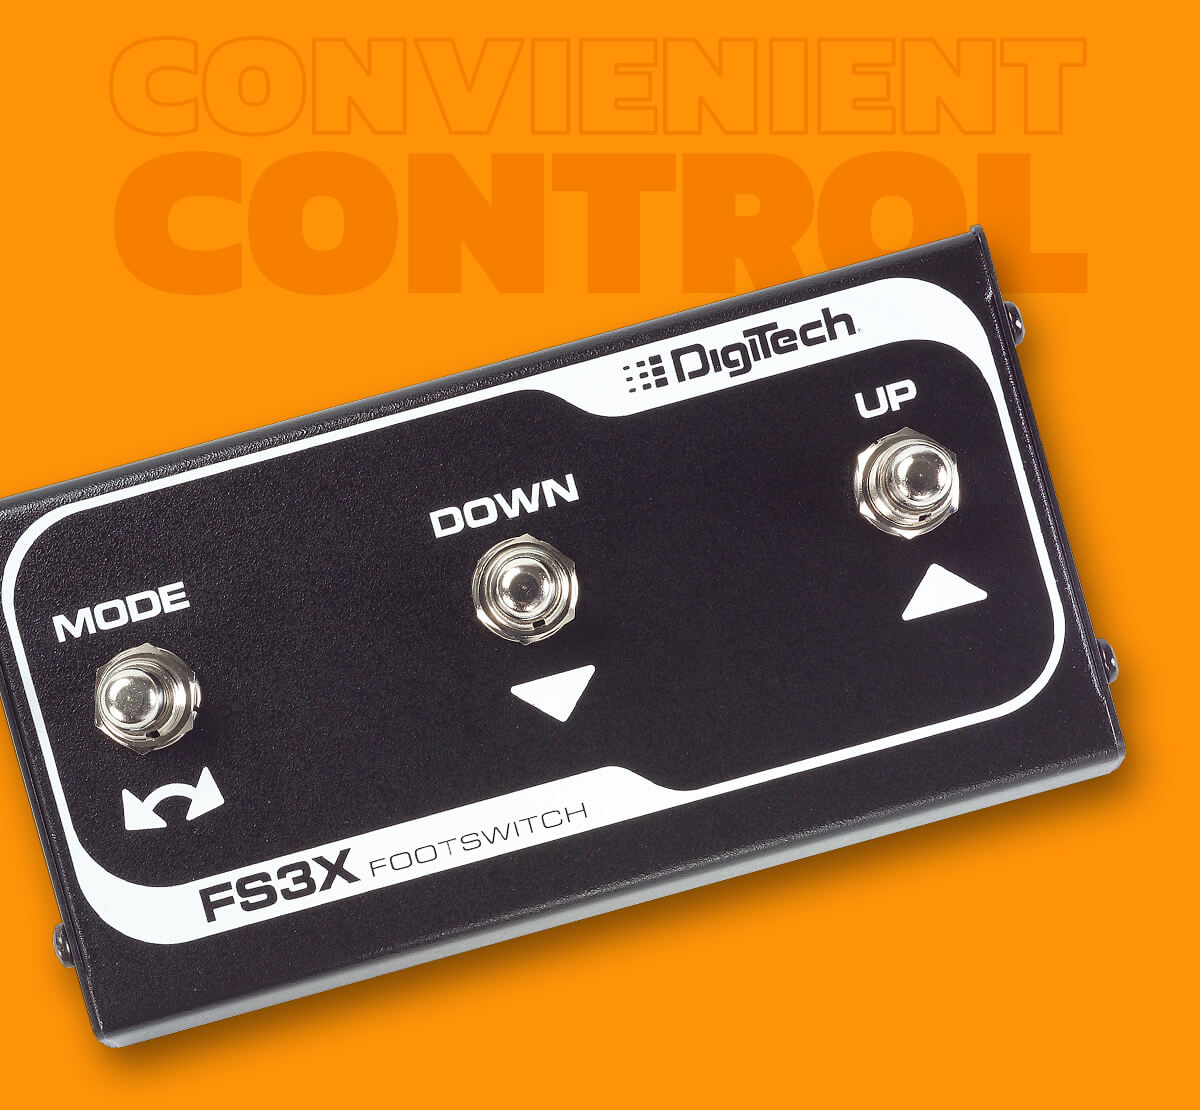 DigiTech FS3X foot switch in black with orange background that says 